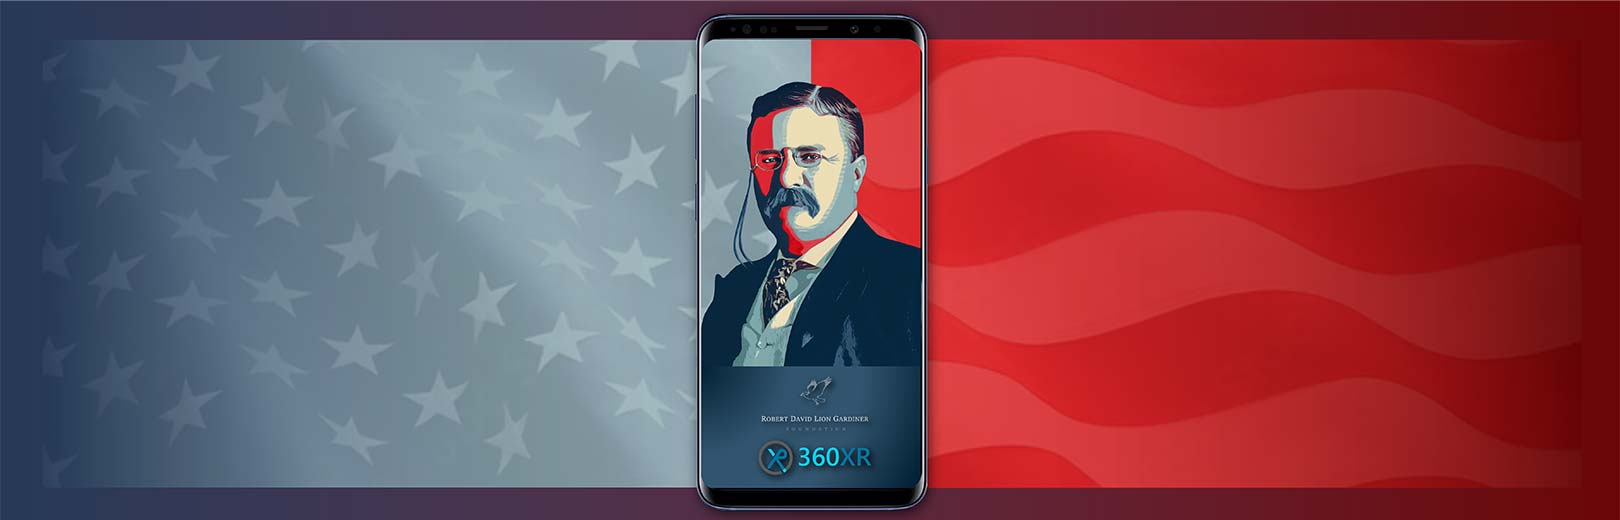 Theodore Roosevelt Augmented Reality Experience